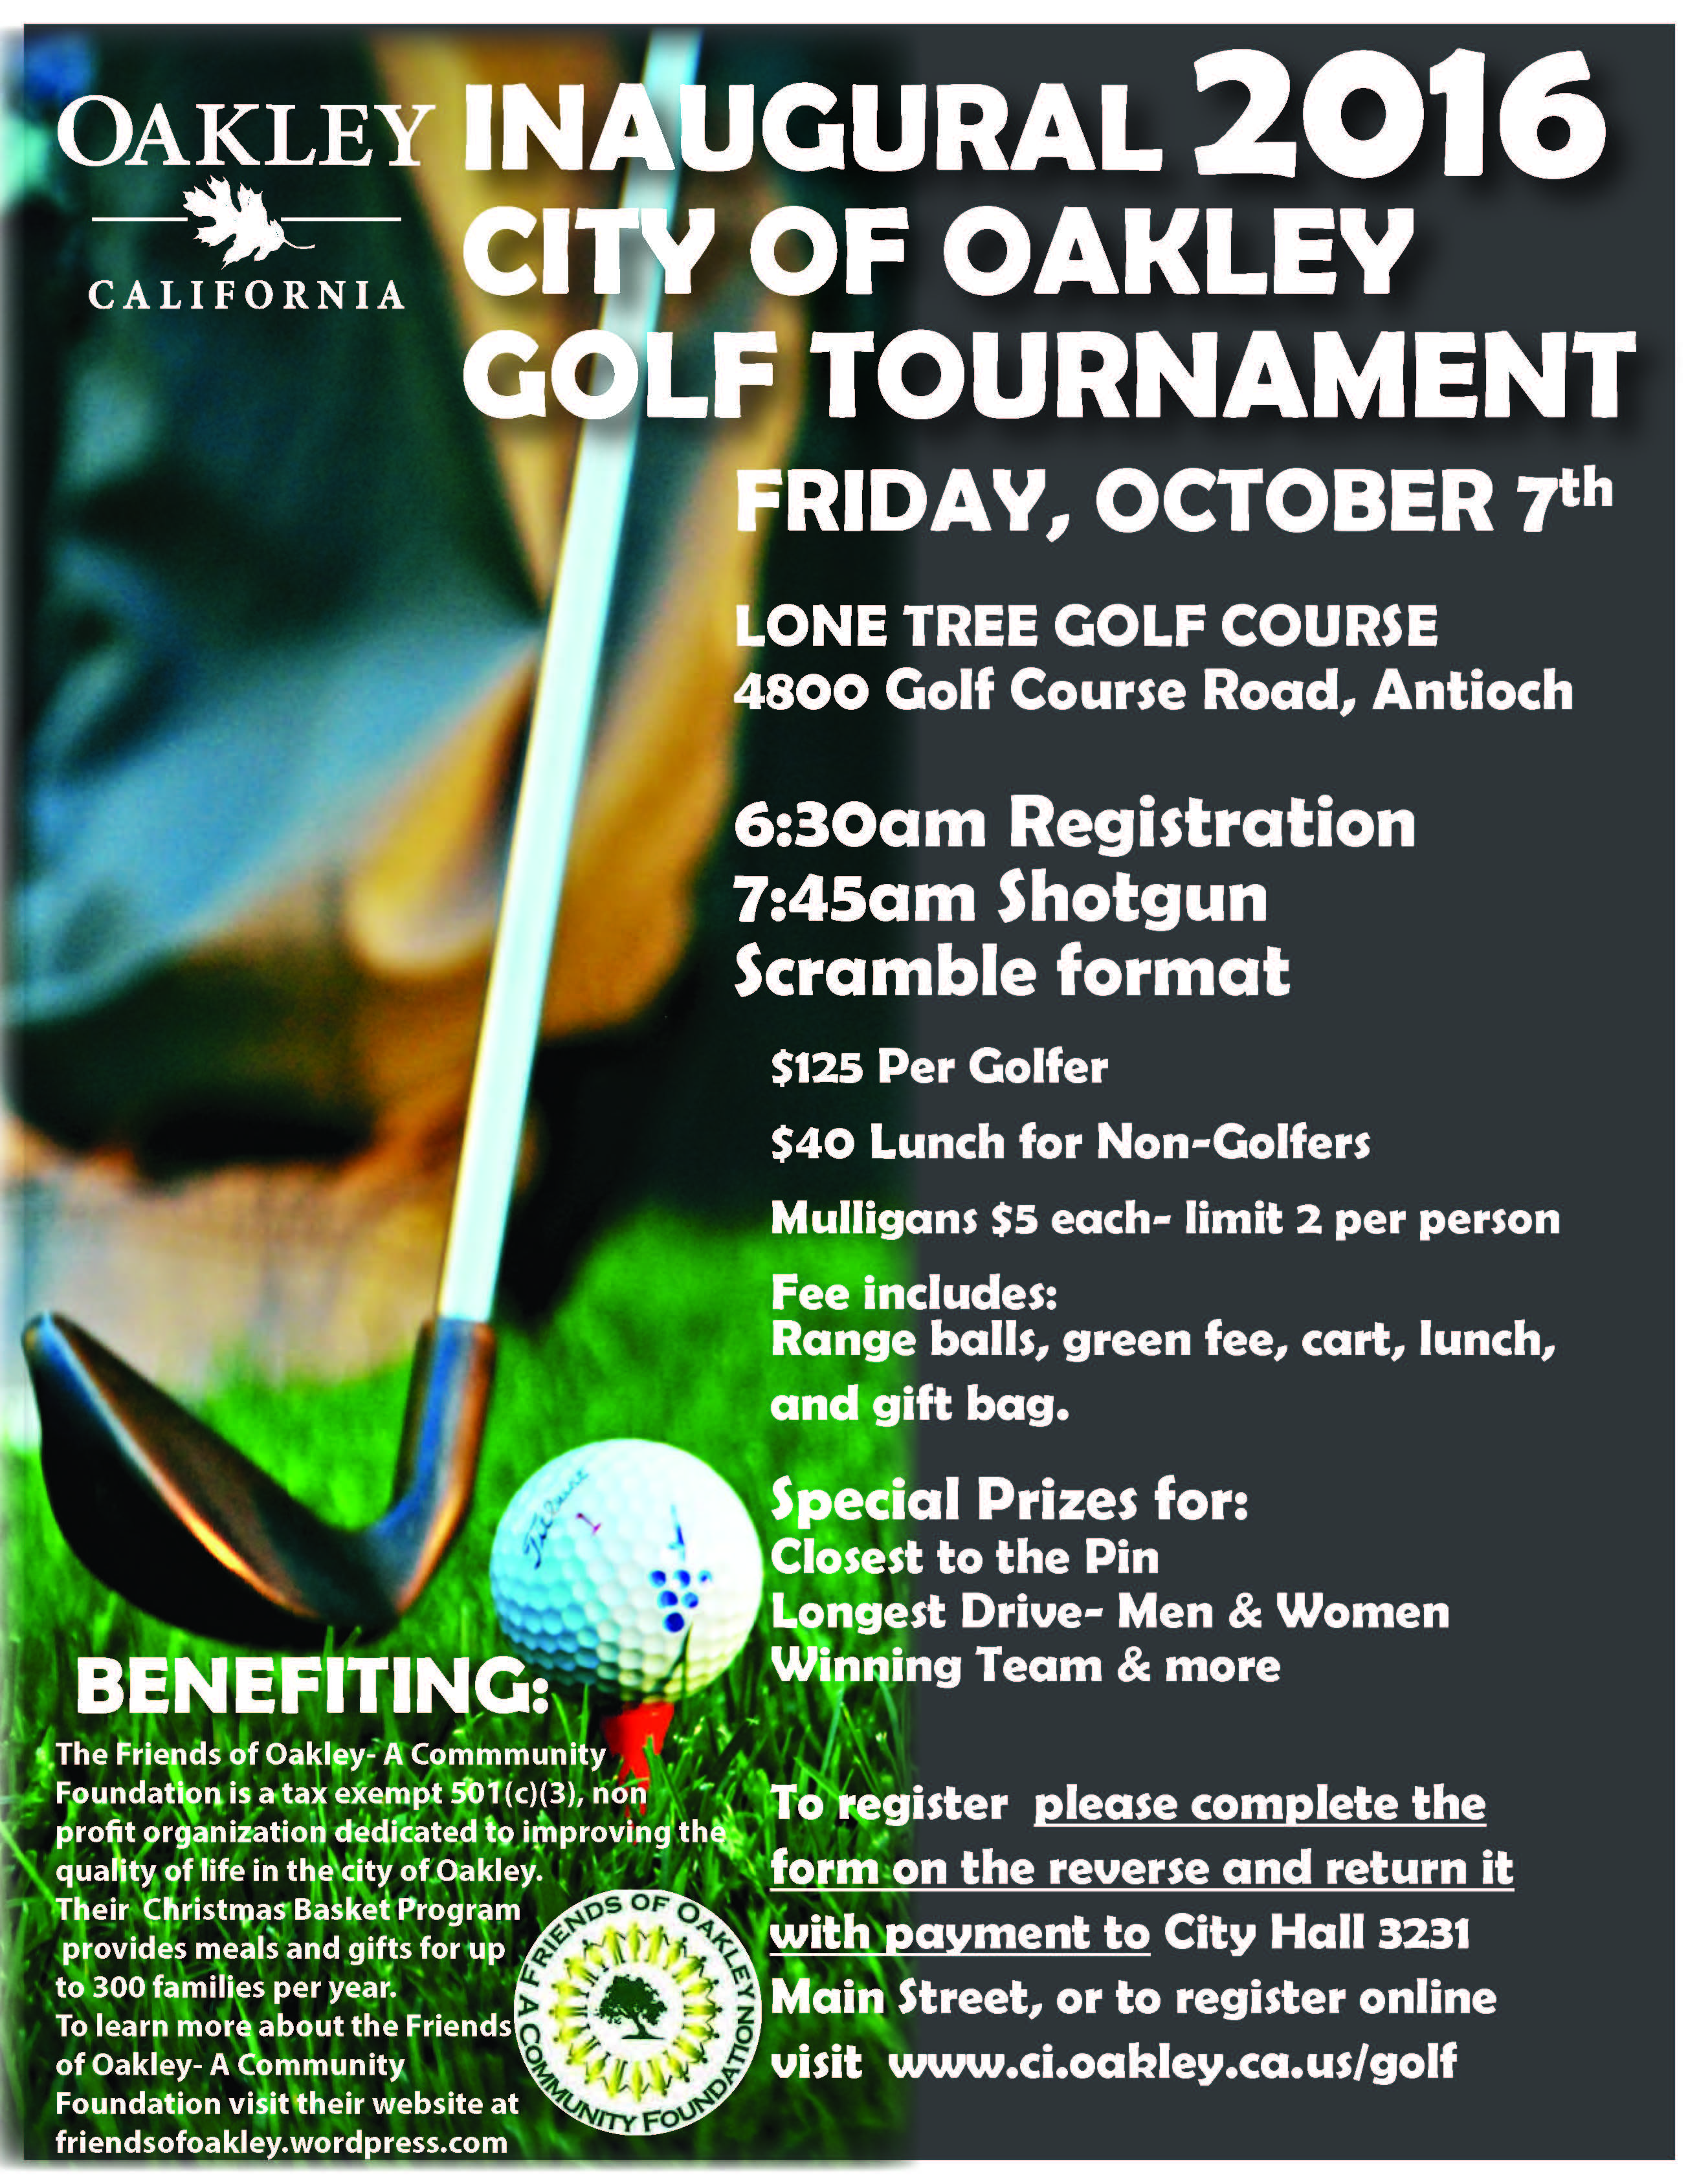 Golf Tournament Flyer(red)_Page_1 - City of Oakley